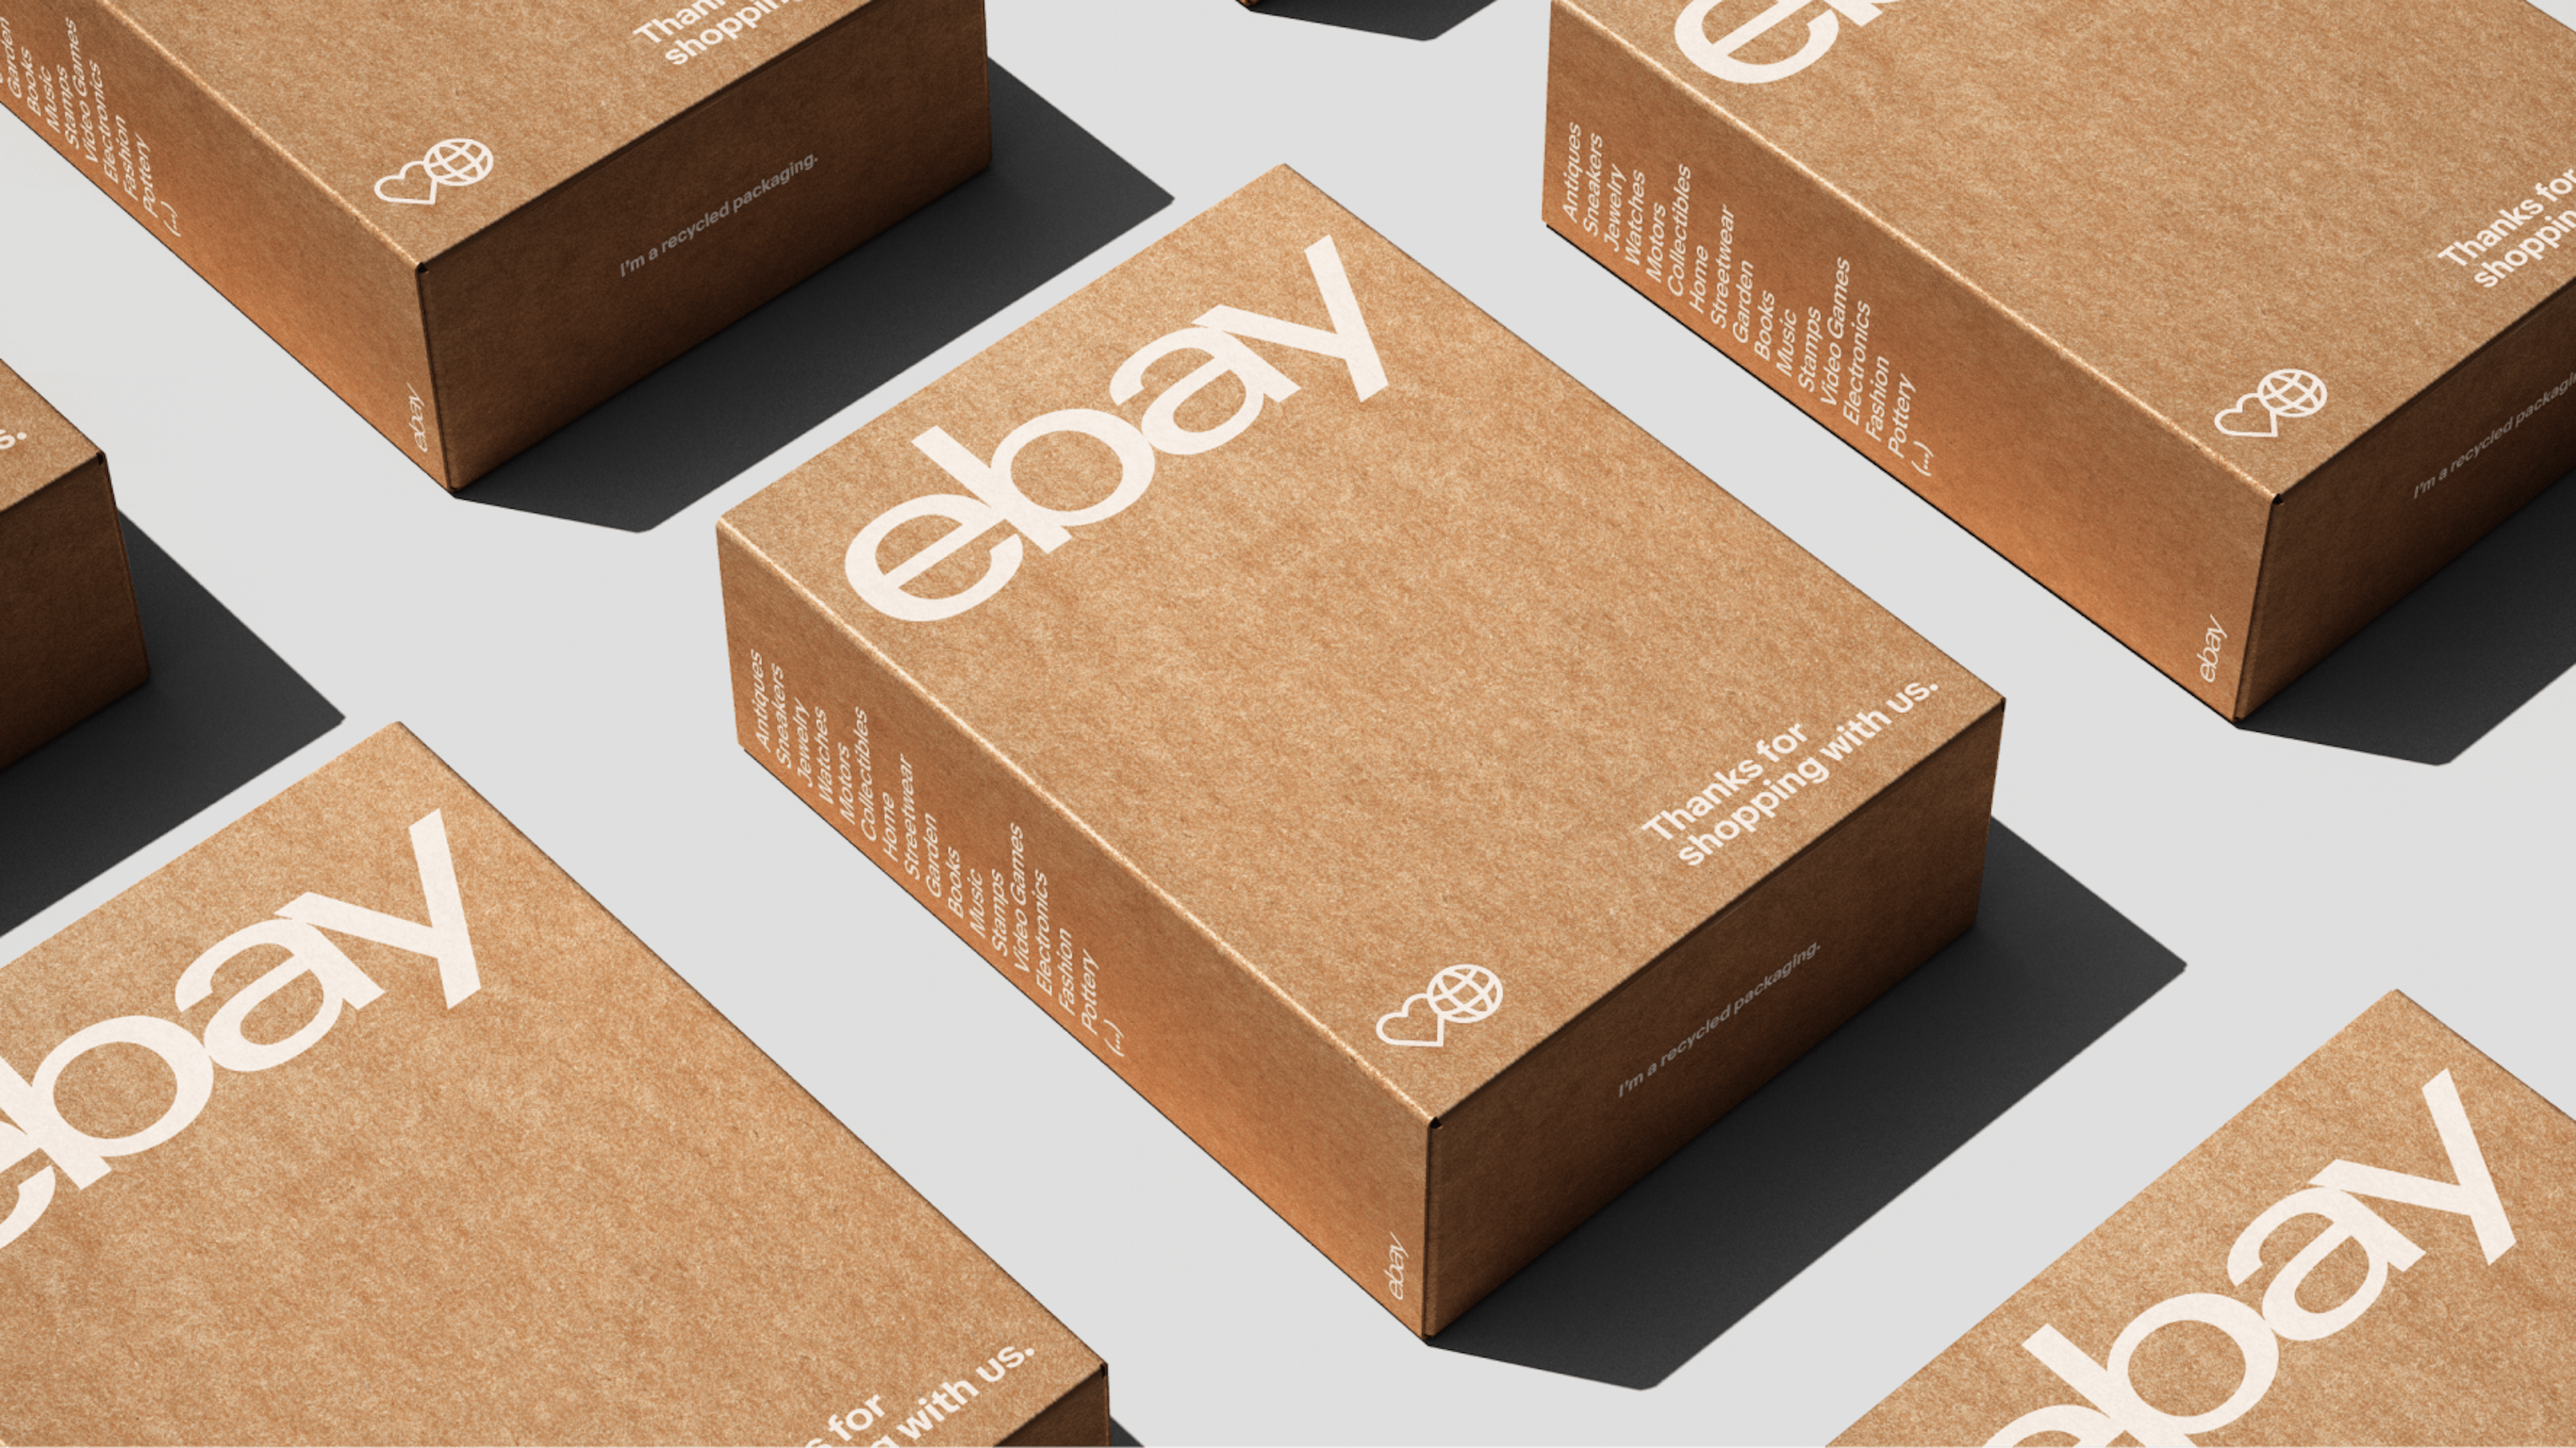 eBay packaging: square cardboard boxes in a grid with white text and logo.